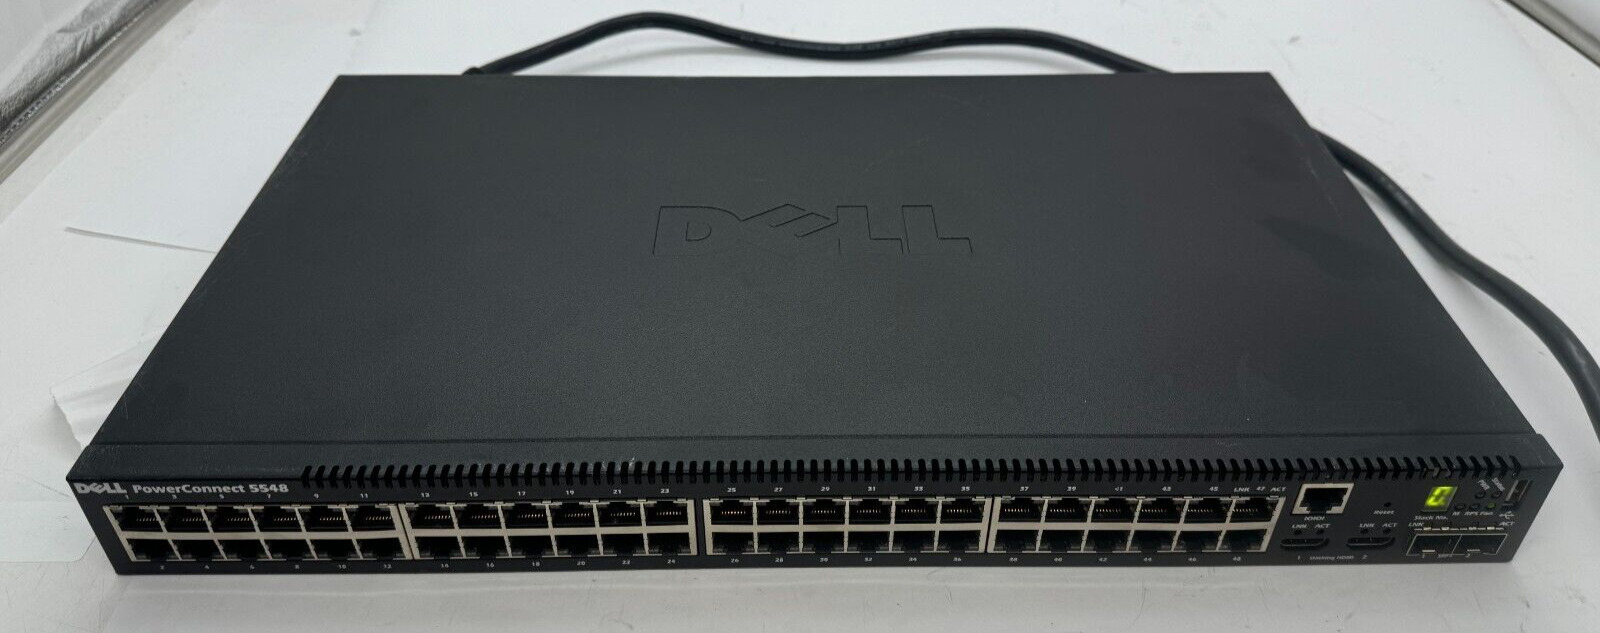 Dell PowerConnect 48-Port -10GbE SFP+ Gigabit Switch 5548 W/o Power Supply